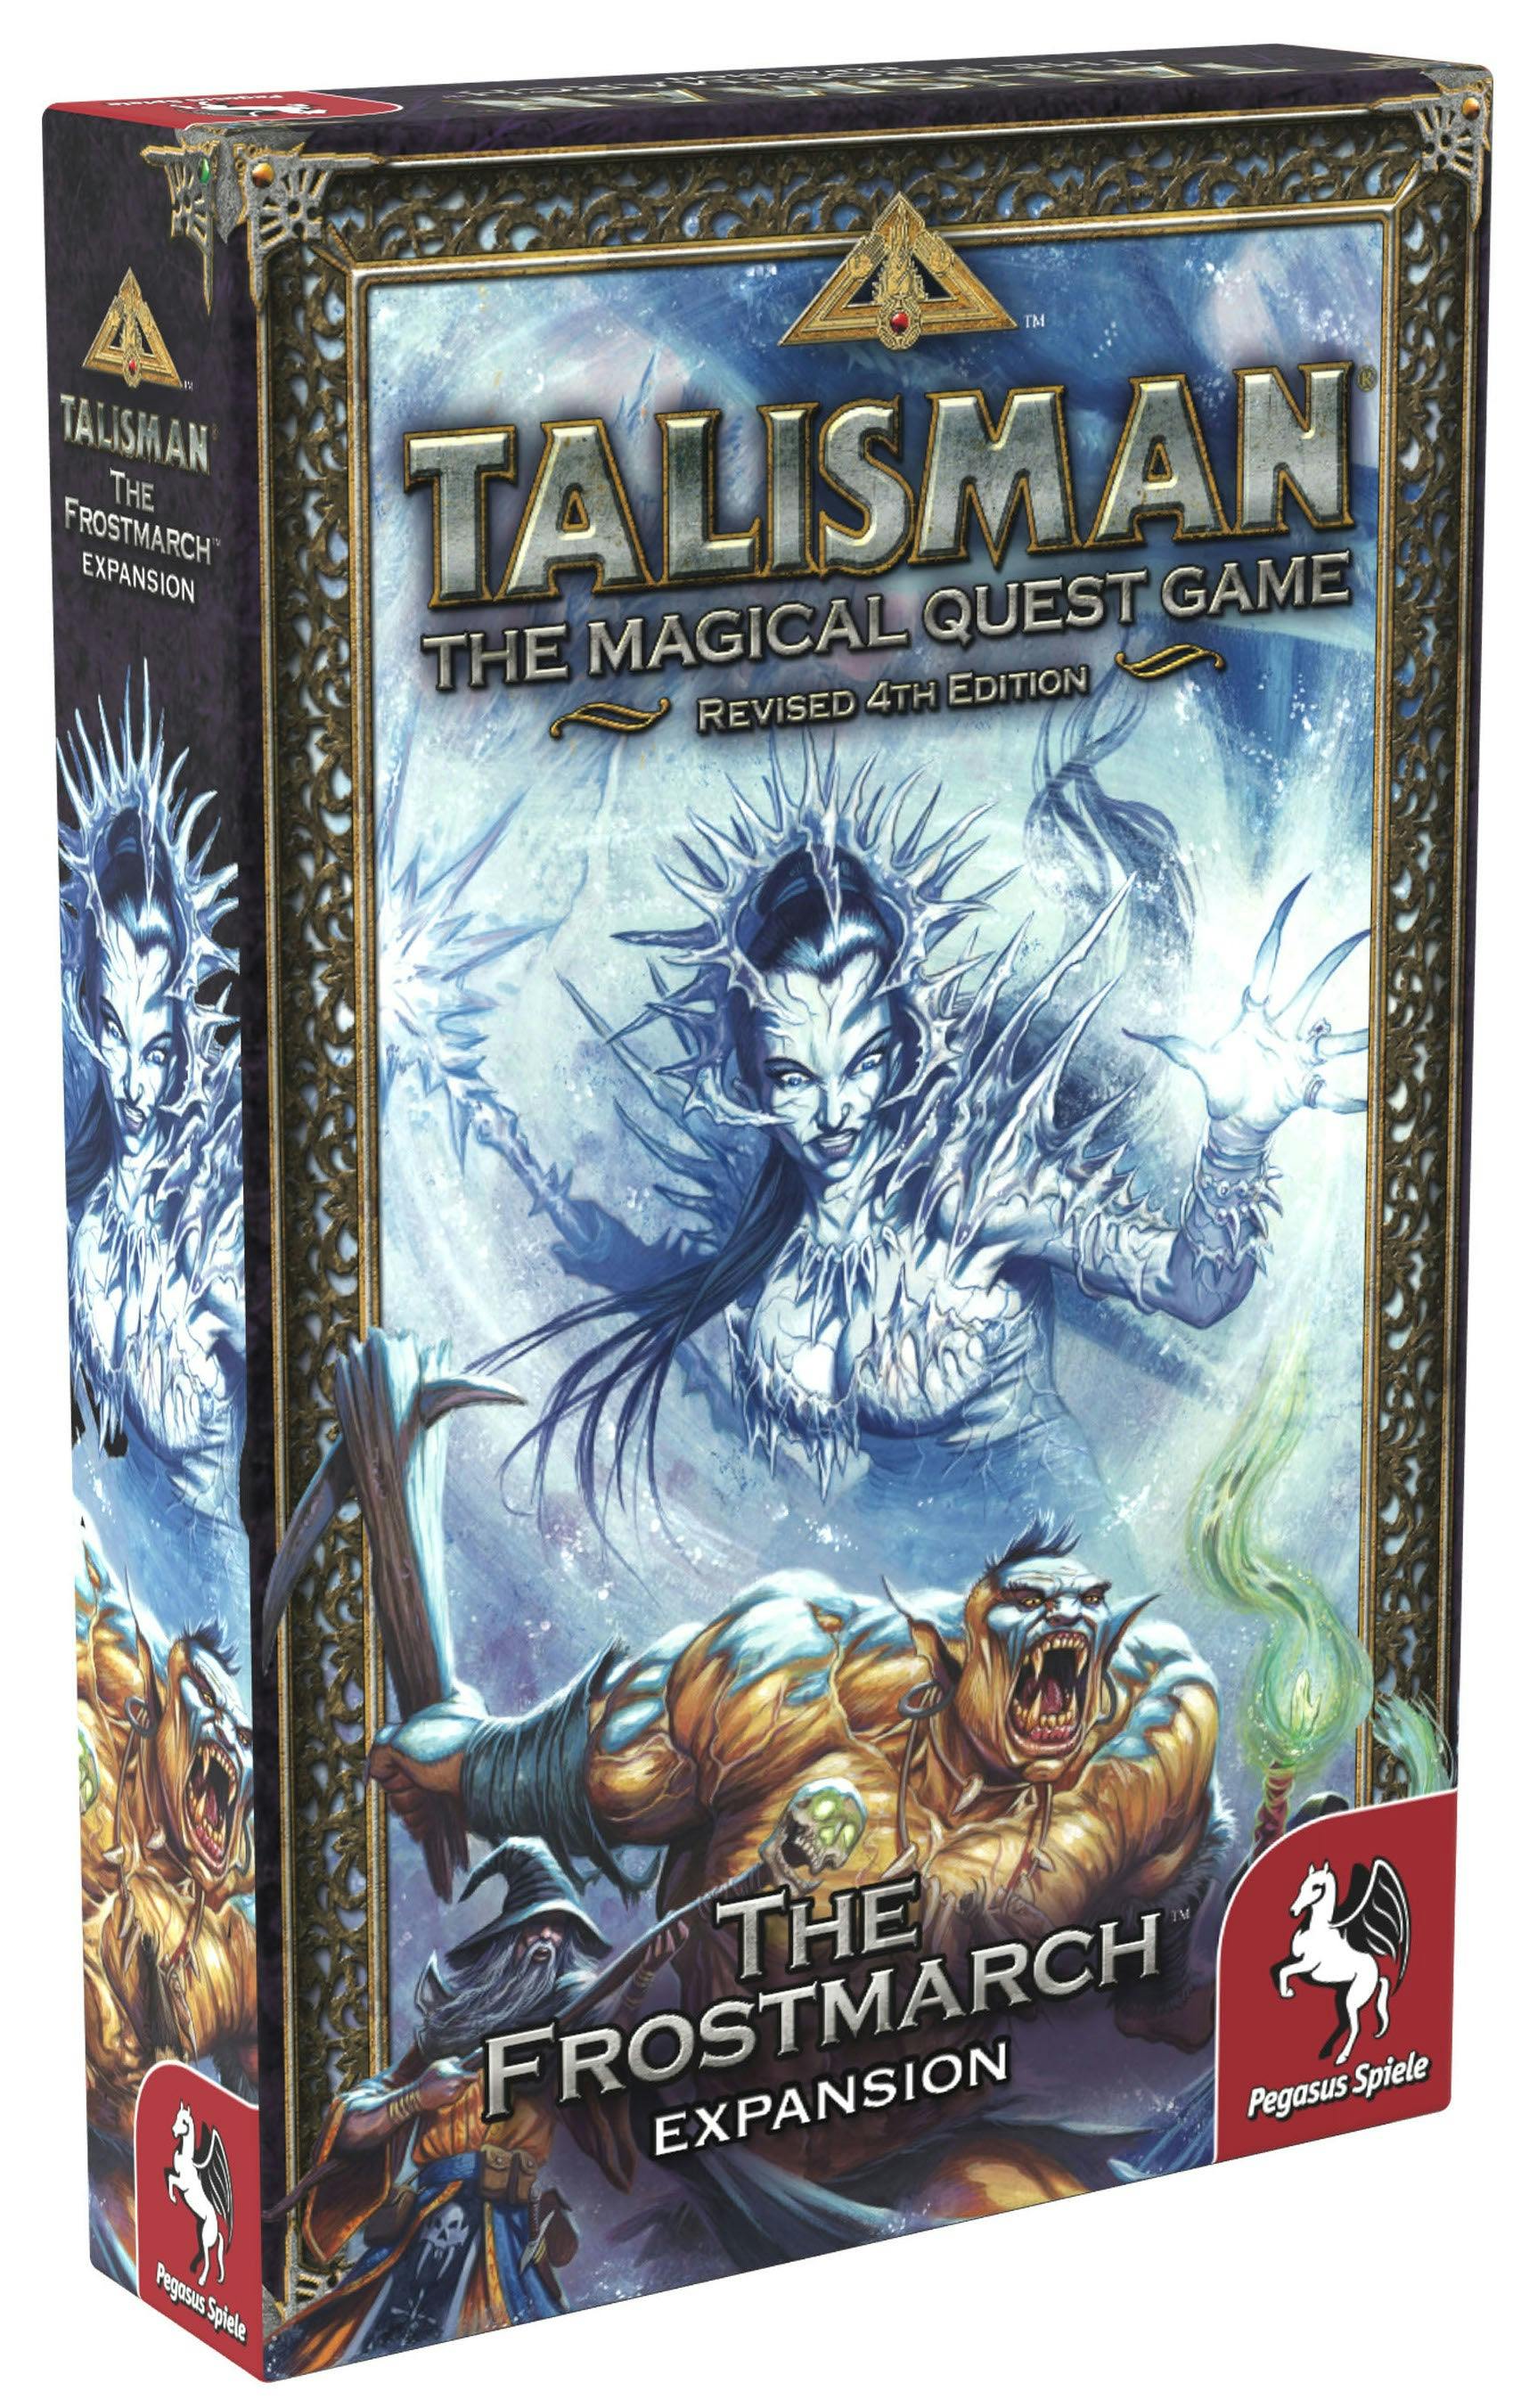 Talisman: The Frost Marsh Expansion